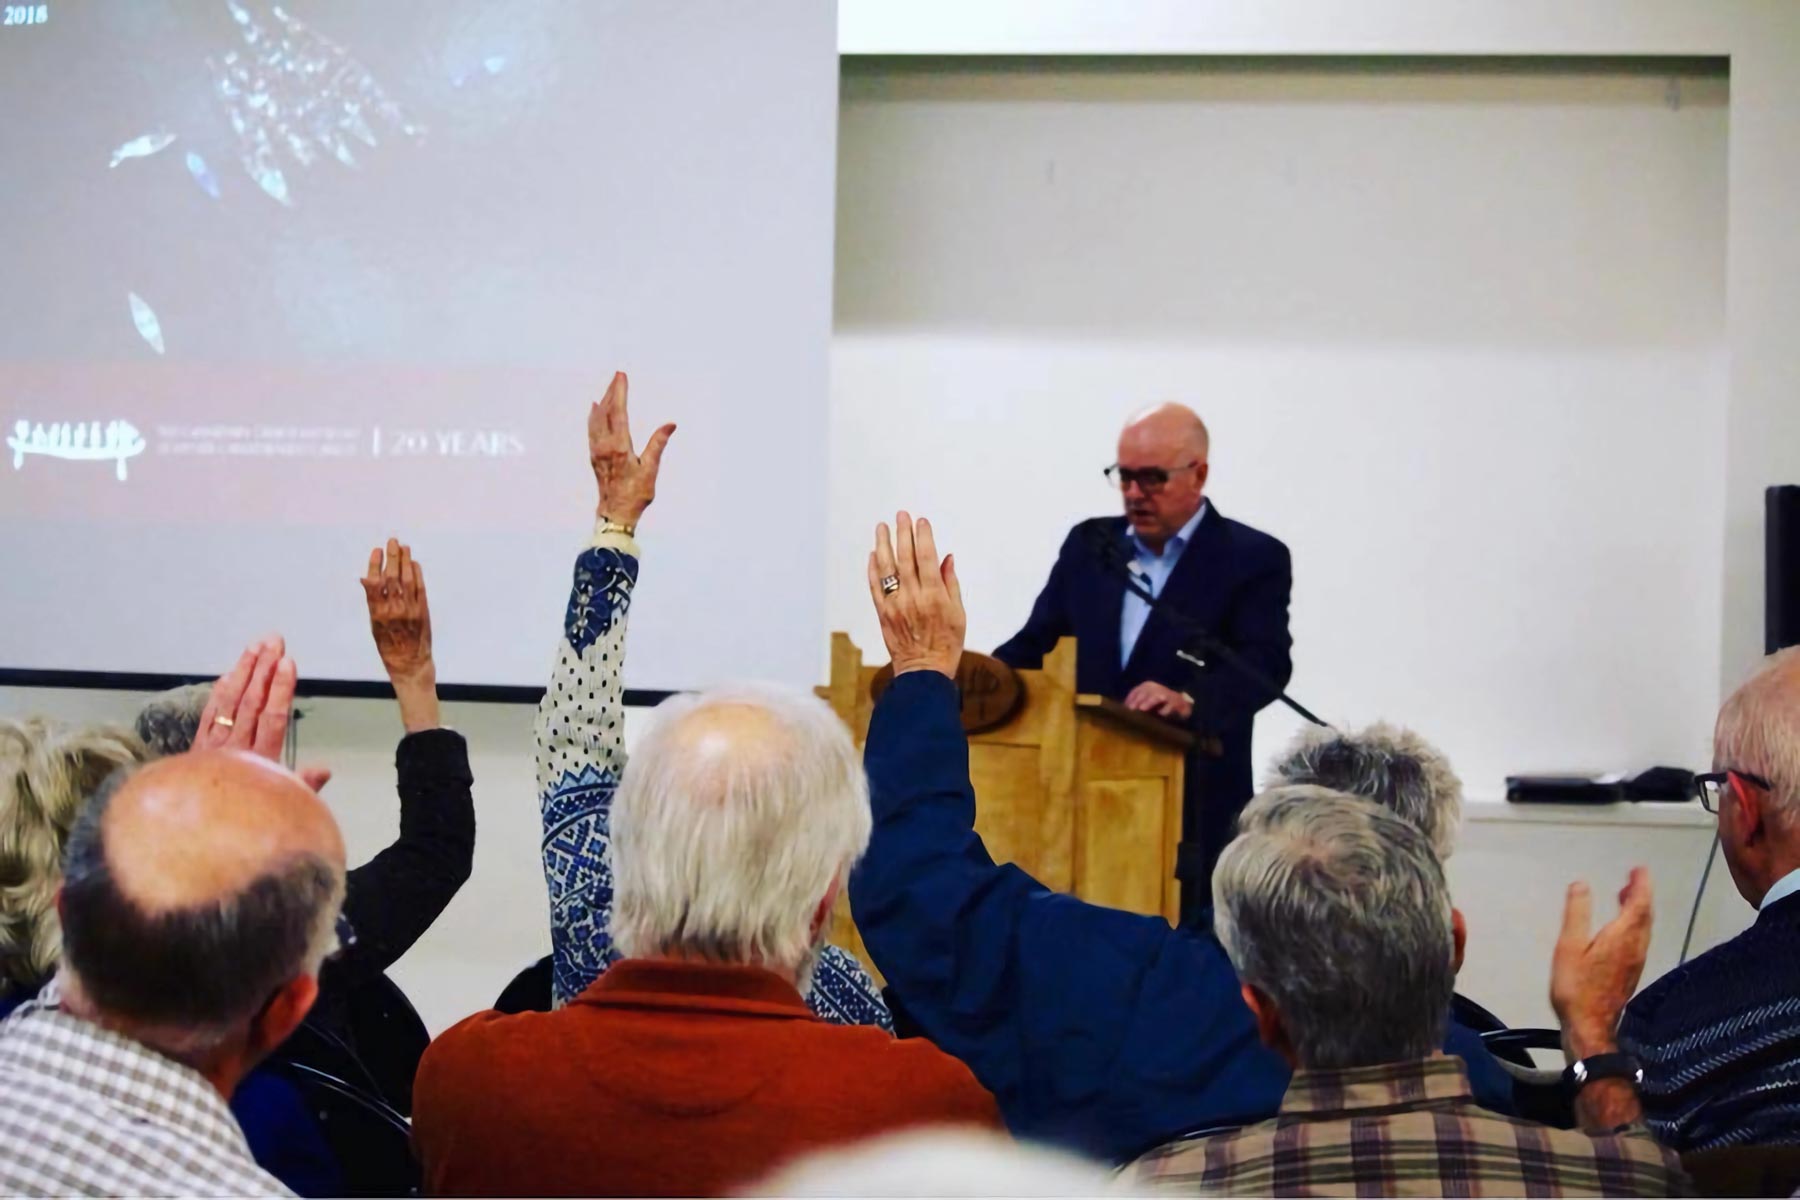 Members of The Canadian Canoe Museum raise their hands to vote during an Annual General Meeting.